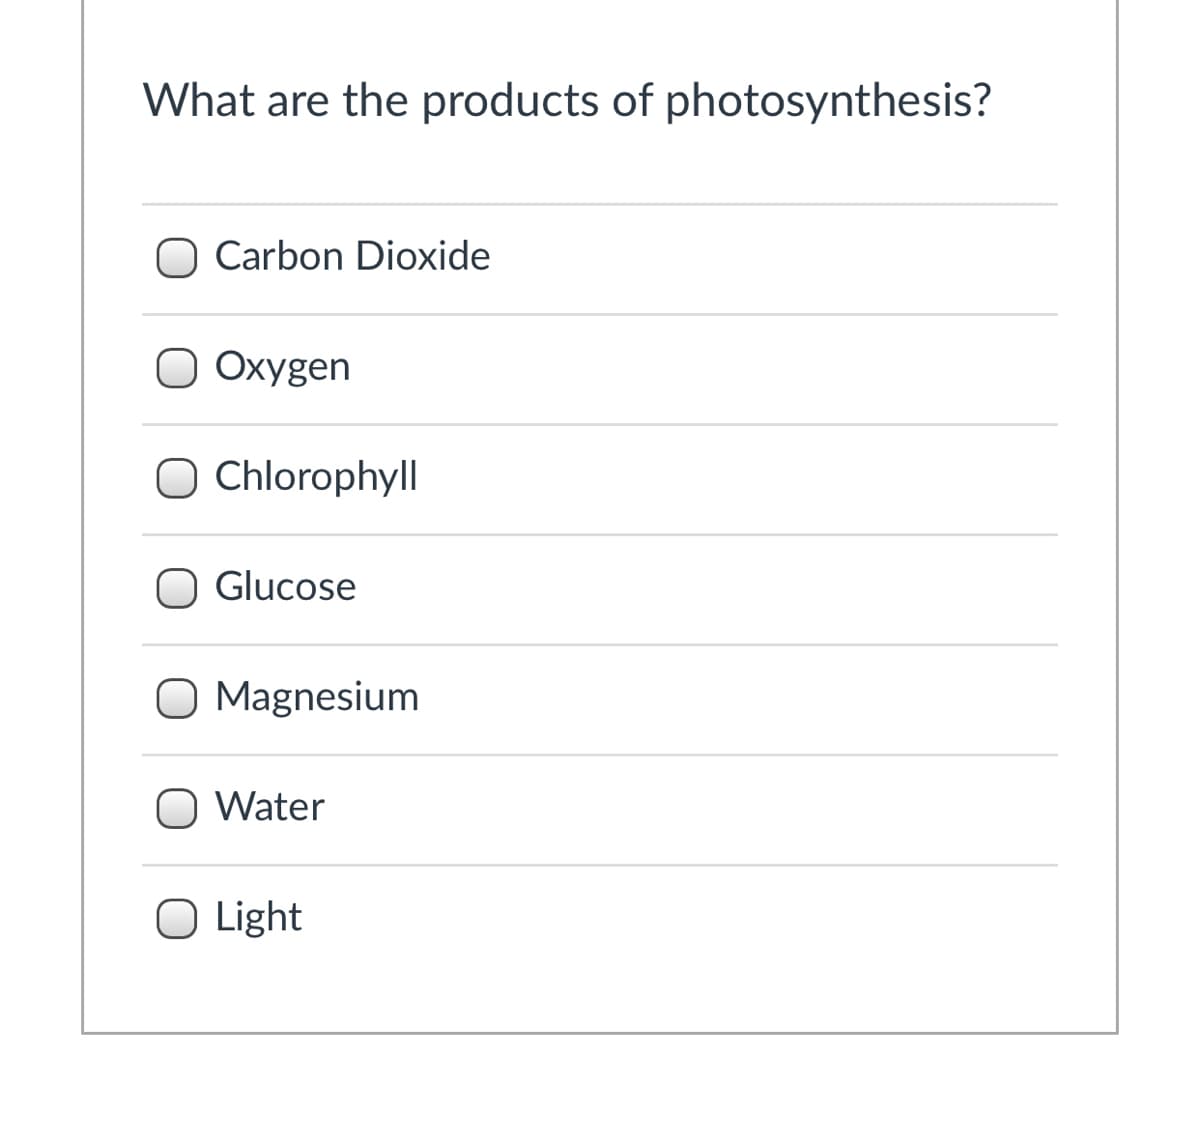 What are the products of photosynthesis?
Carbon Dioxide
O Oxygen
O Chlorophyll
Glucose
O Magnesium
O Water
O Light
